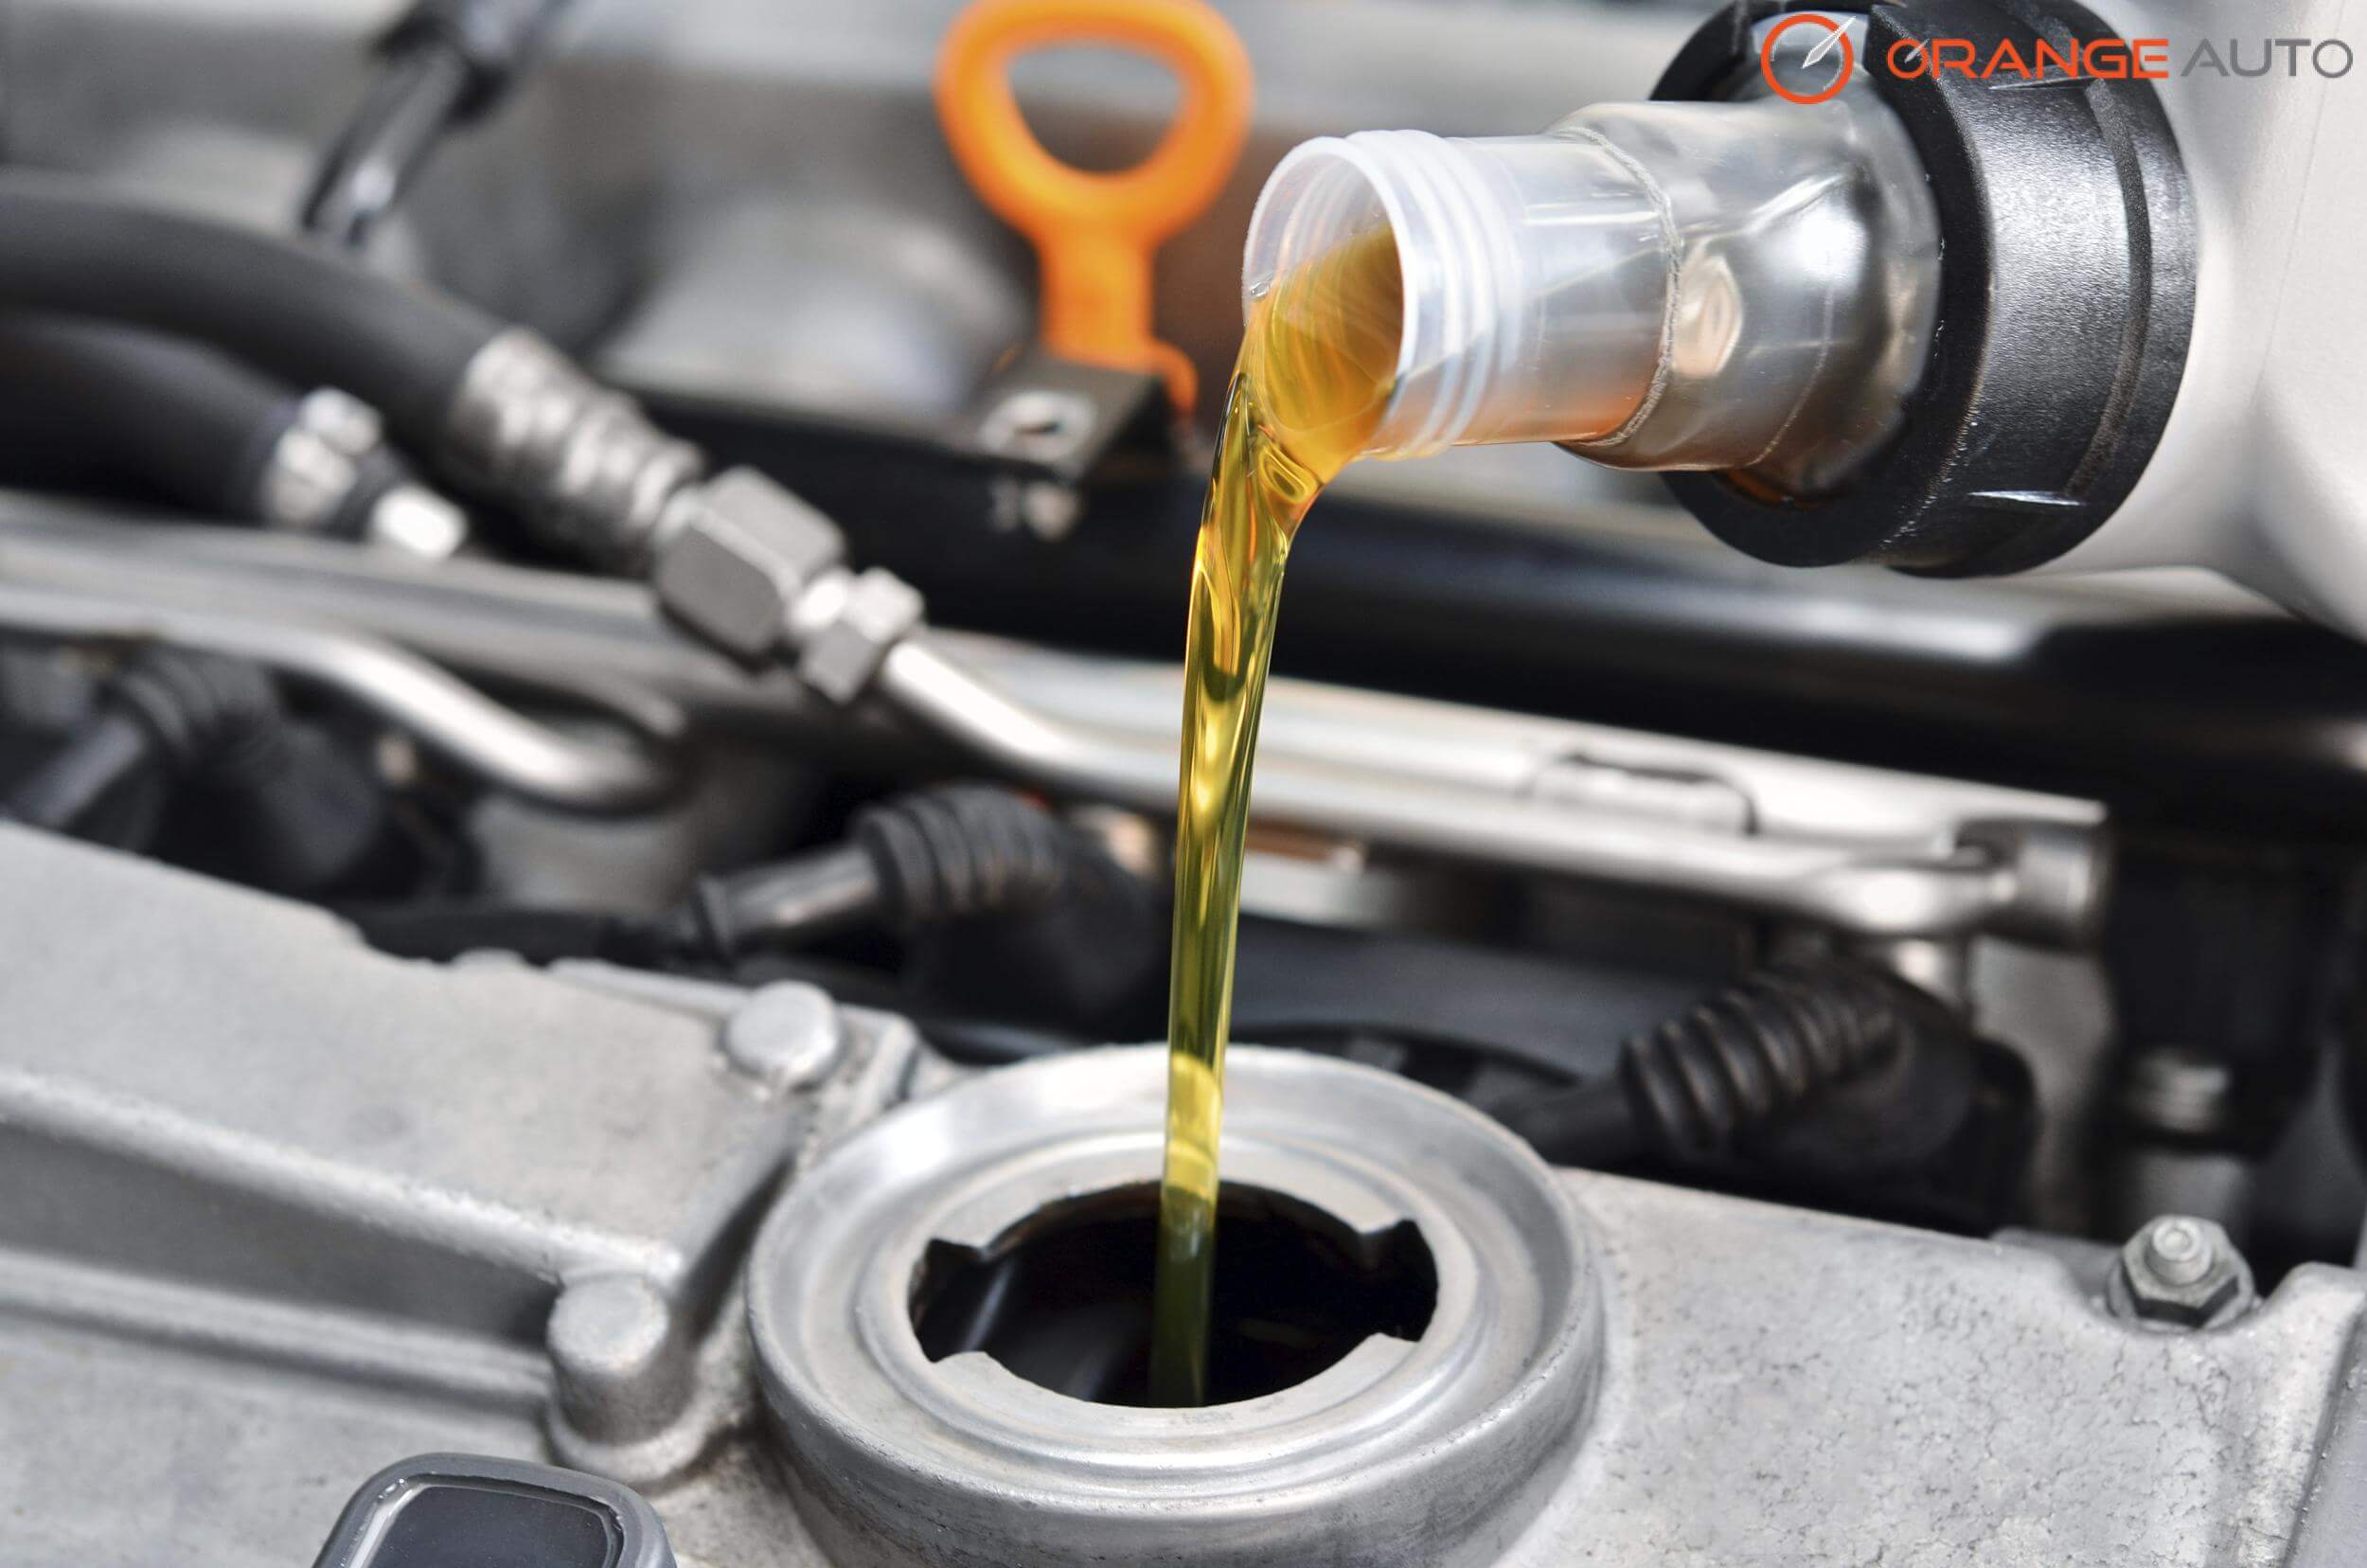 Changing car oil